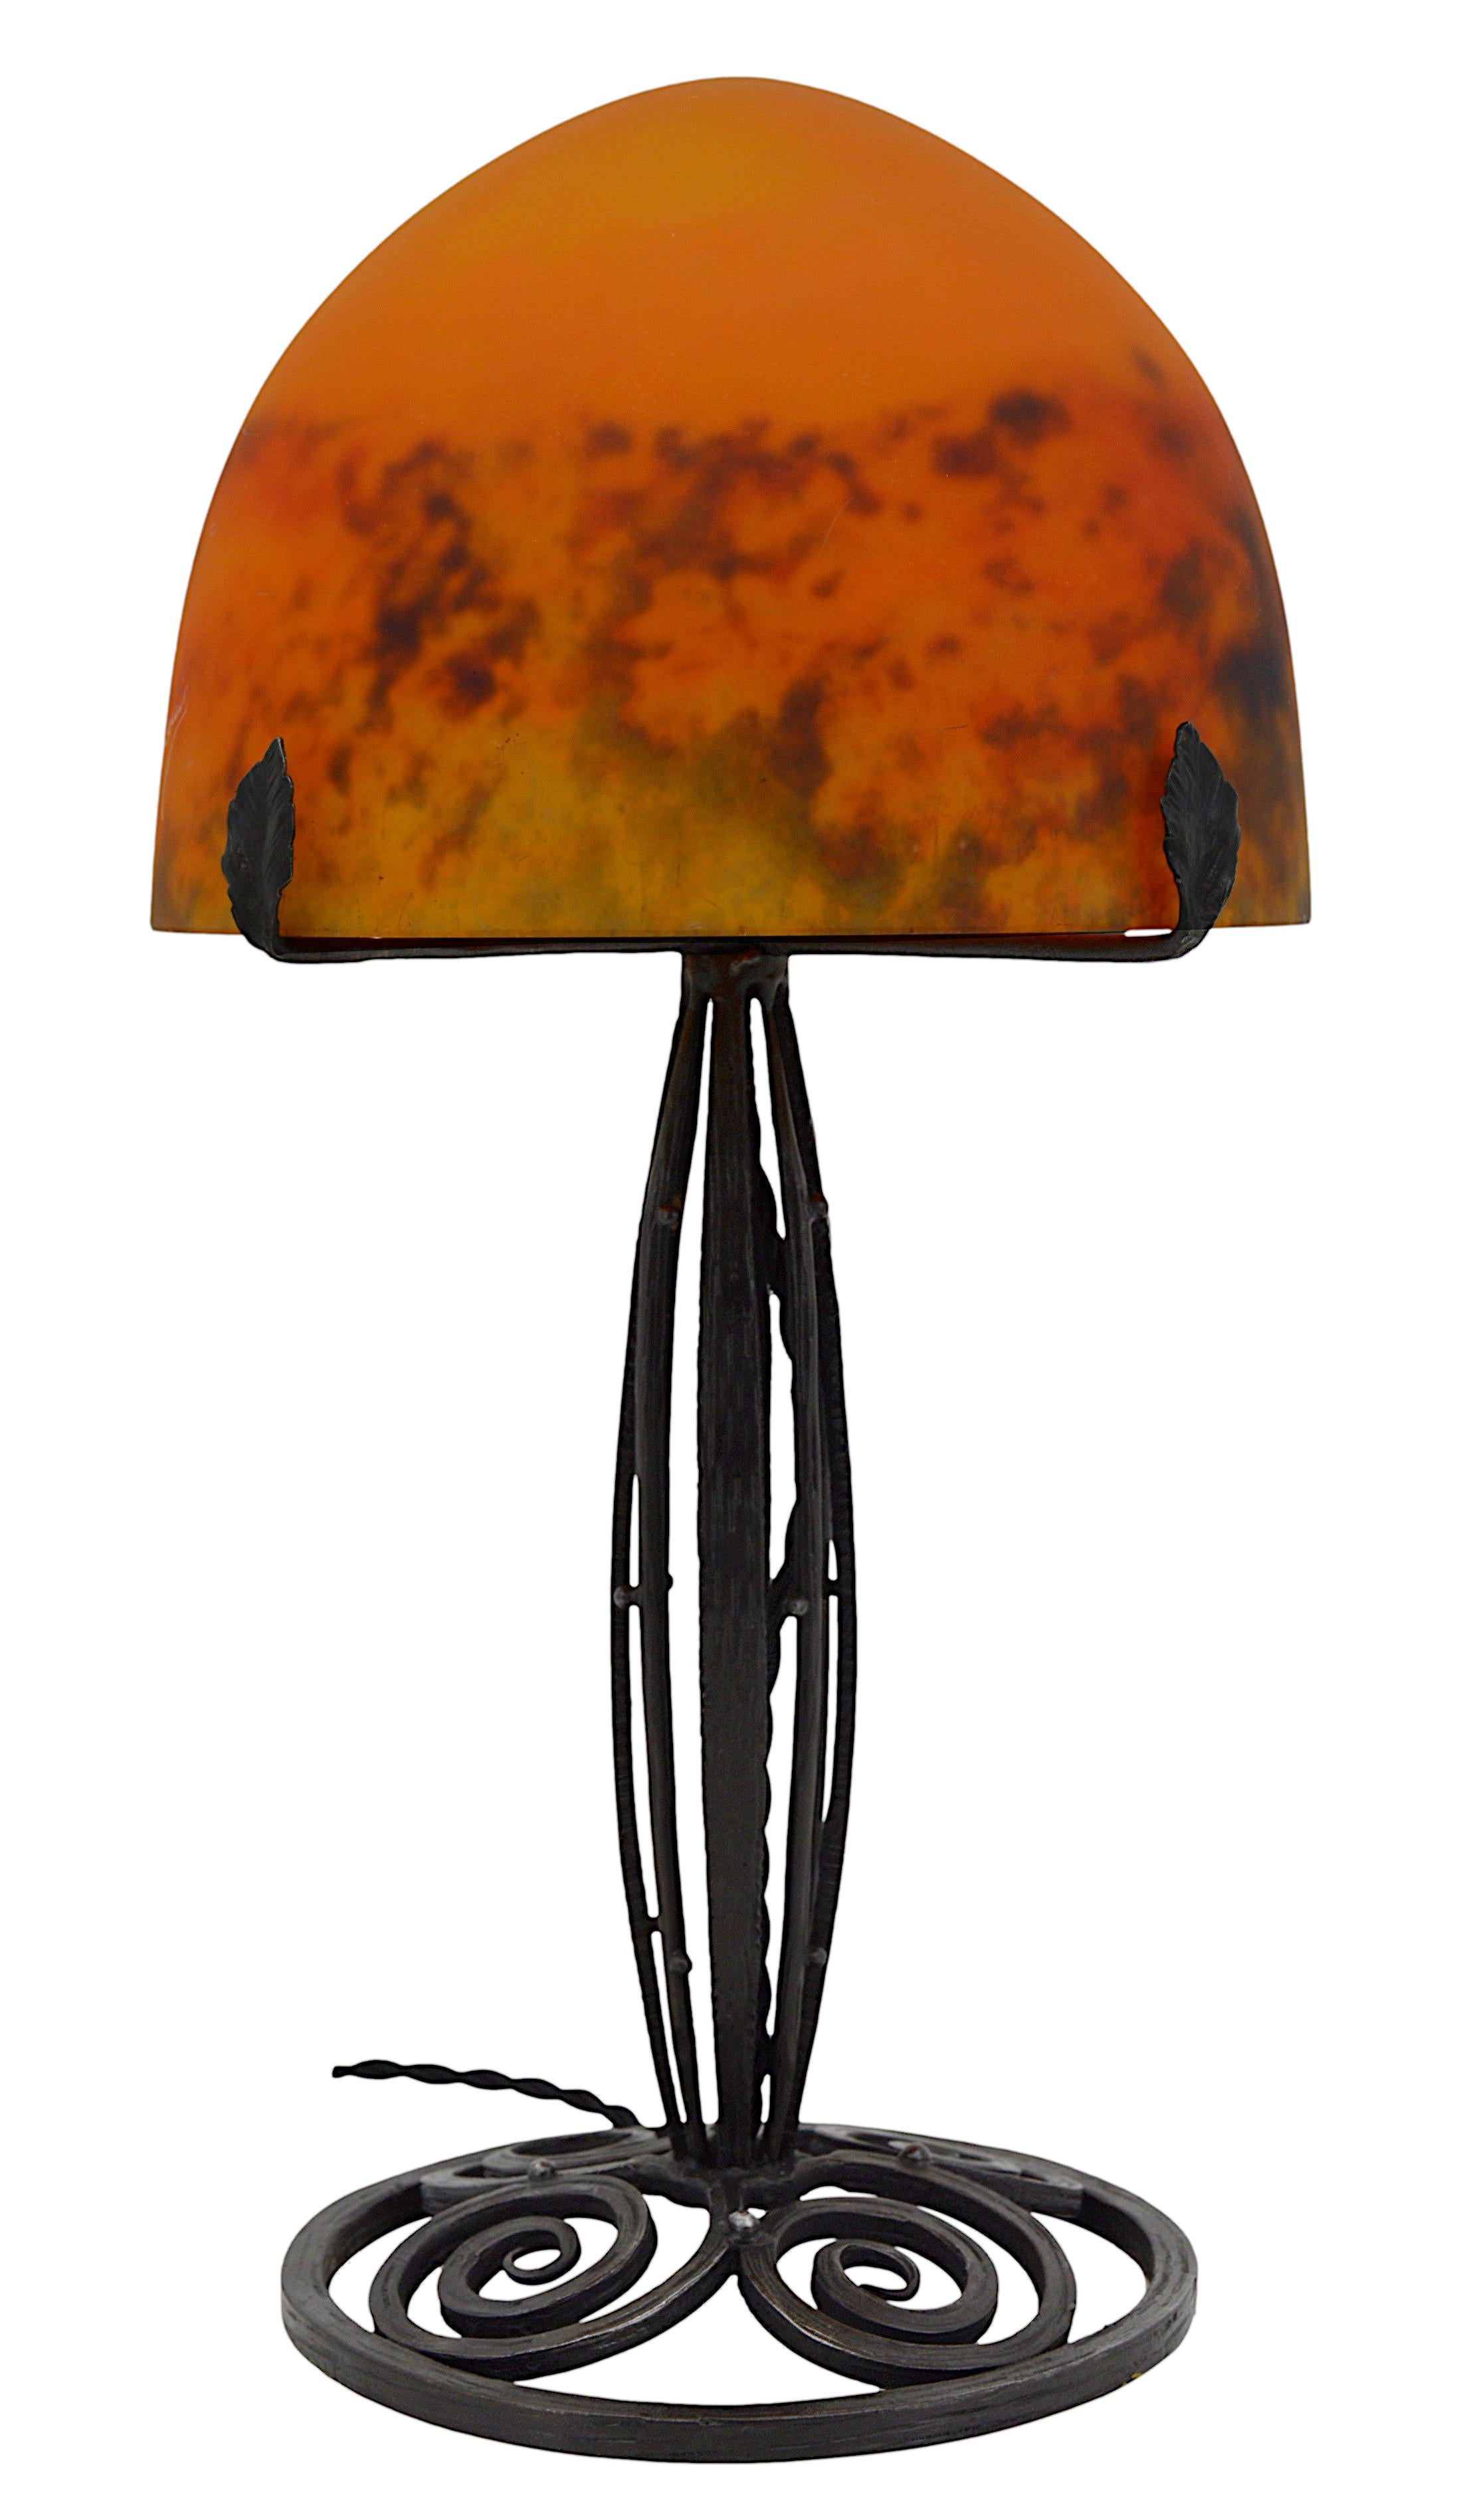 French Art Deco table lamp by Daum (Croismare), France, late 1920s. Blown double glass shade by Daum on its wrought iron base. Colors : orange, red and dark blue. Measures: Height : 16.3